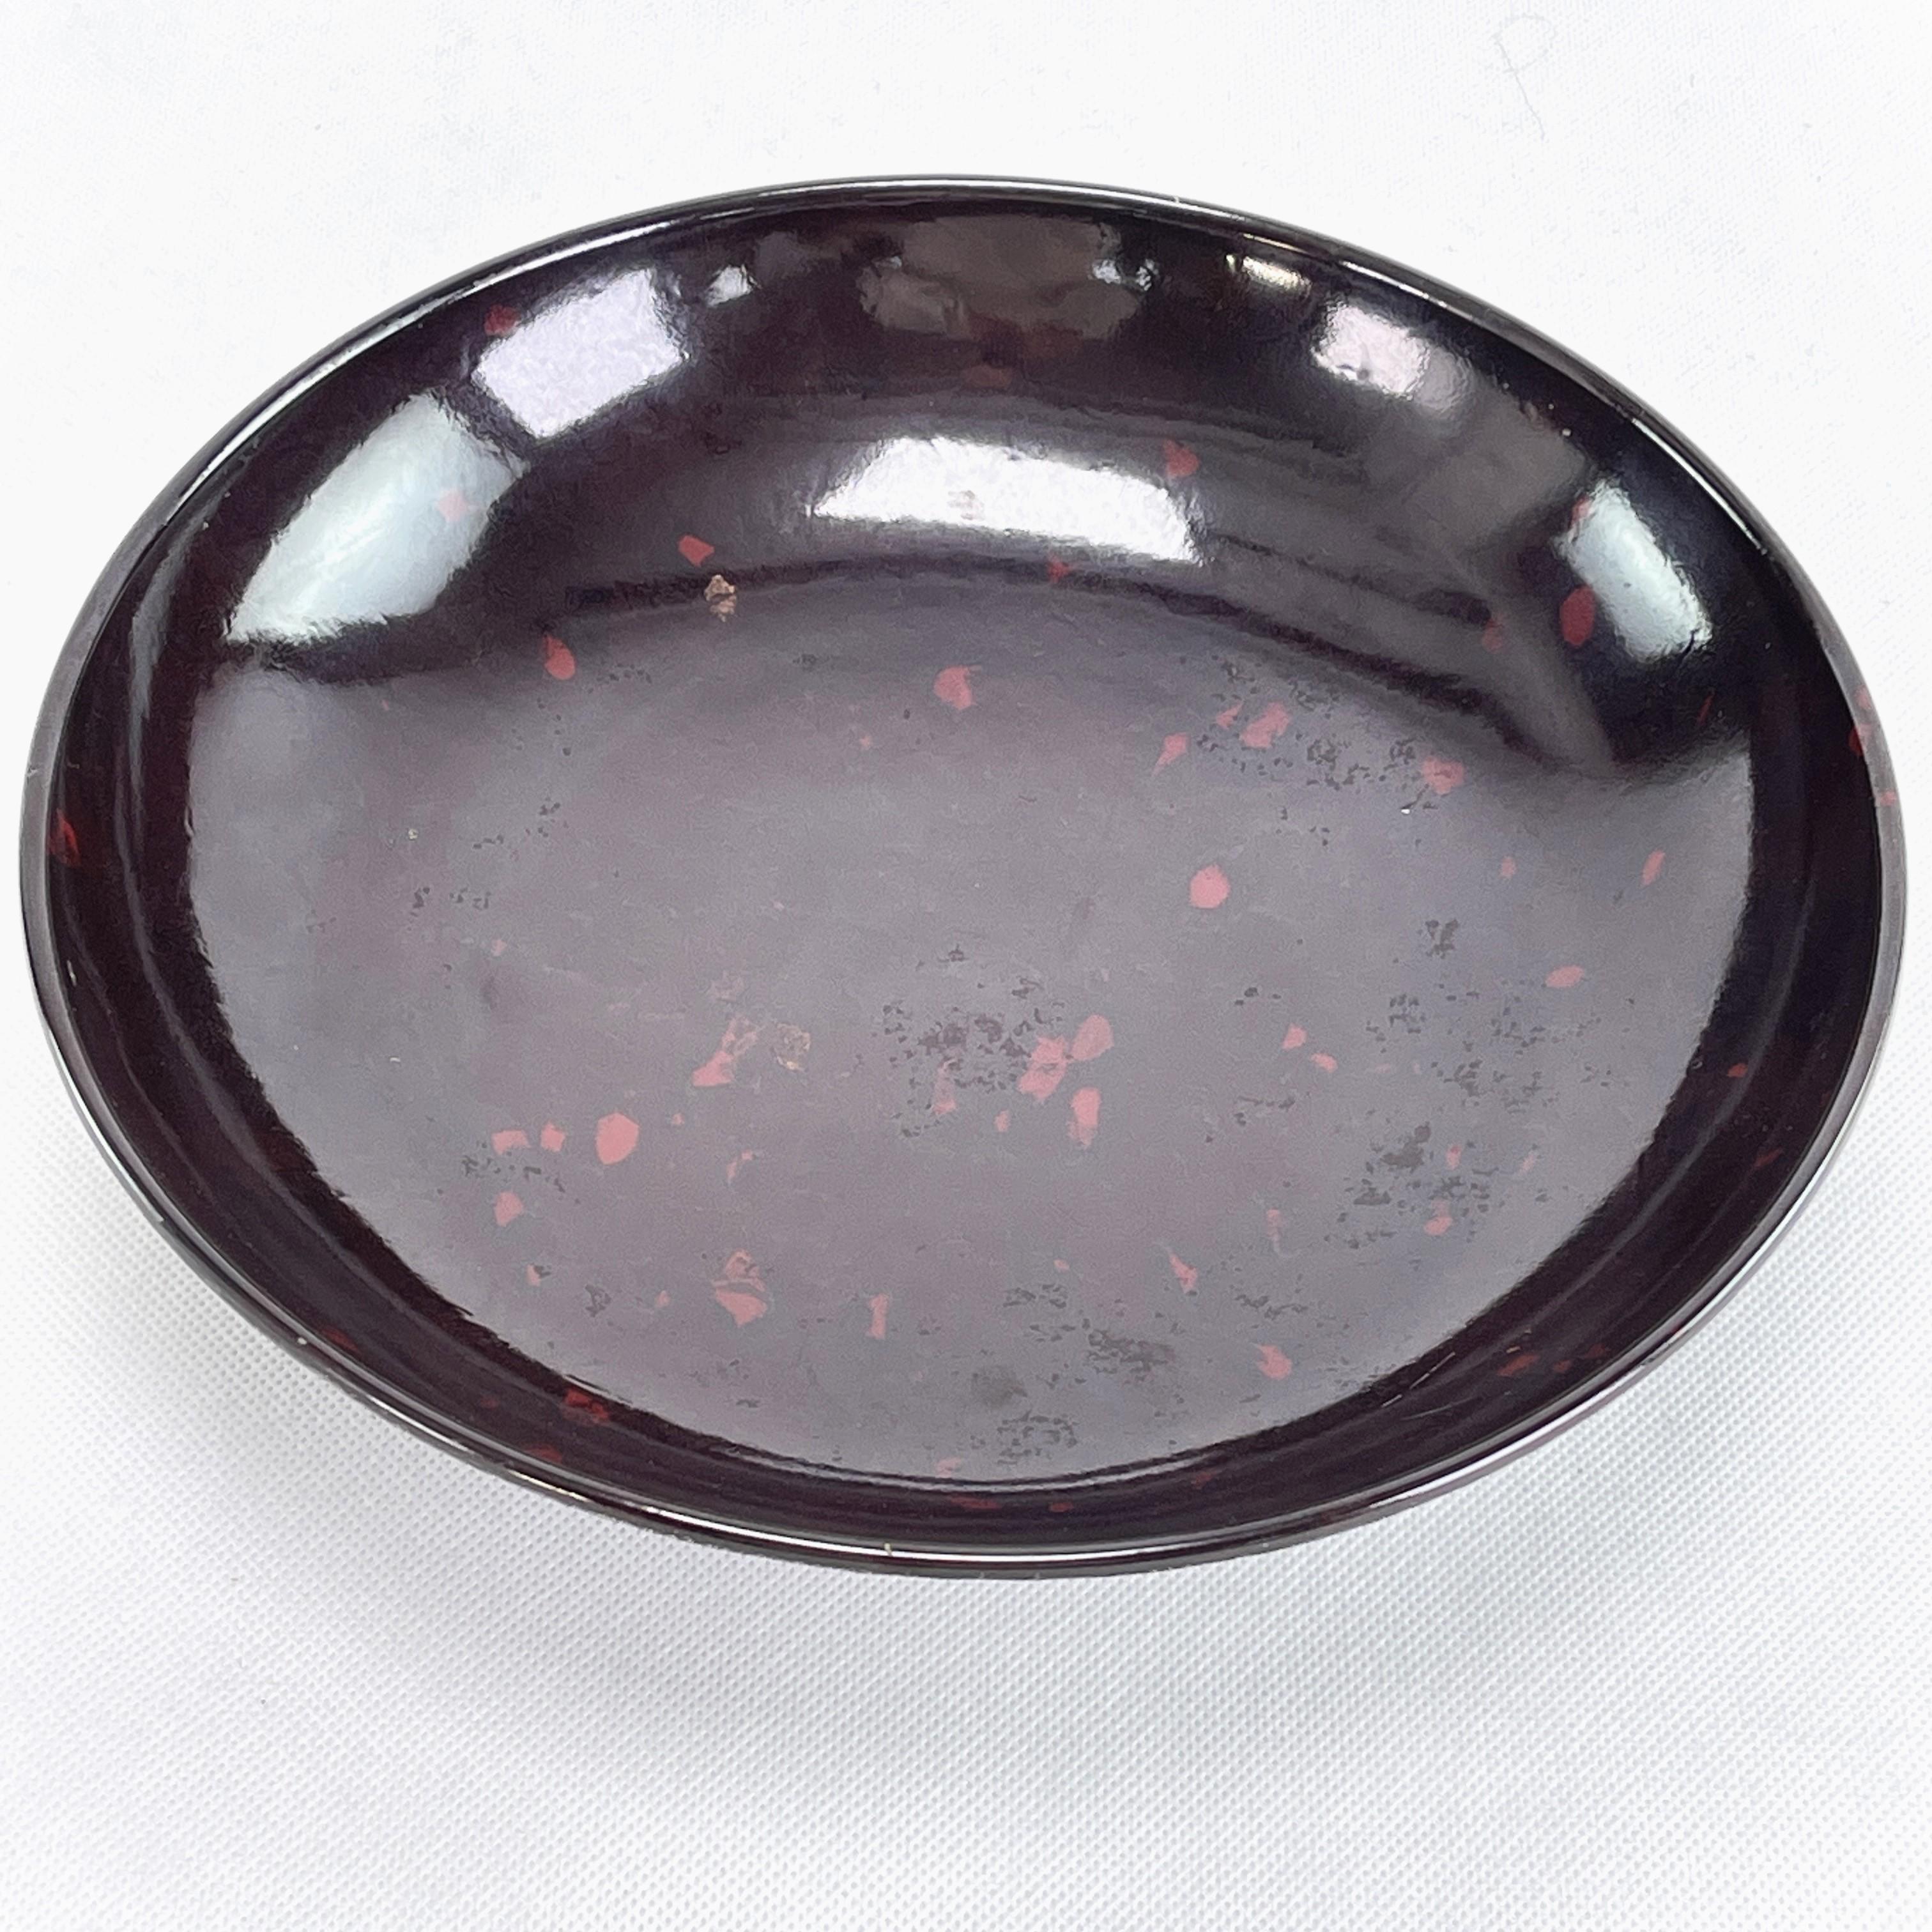 Bakelite glass bowl - 1930s.

This opalescent bakelite bowl is in excellent condition. It is still a stylish must-have for any Art Deco interior. 

This bowl is a versatile accessory that is perfect for storing jewellery, coins or other small